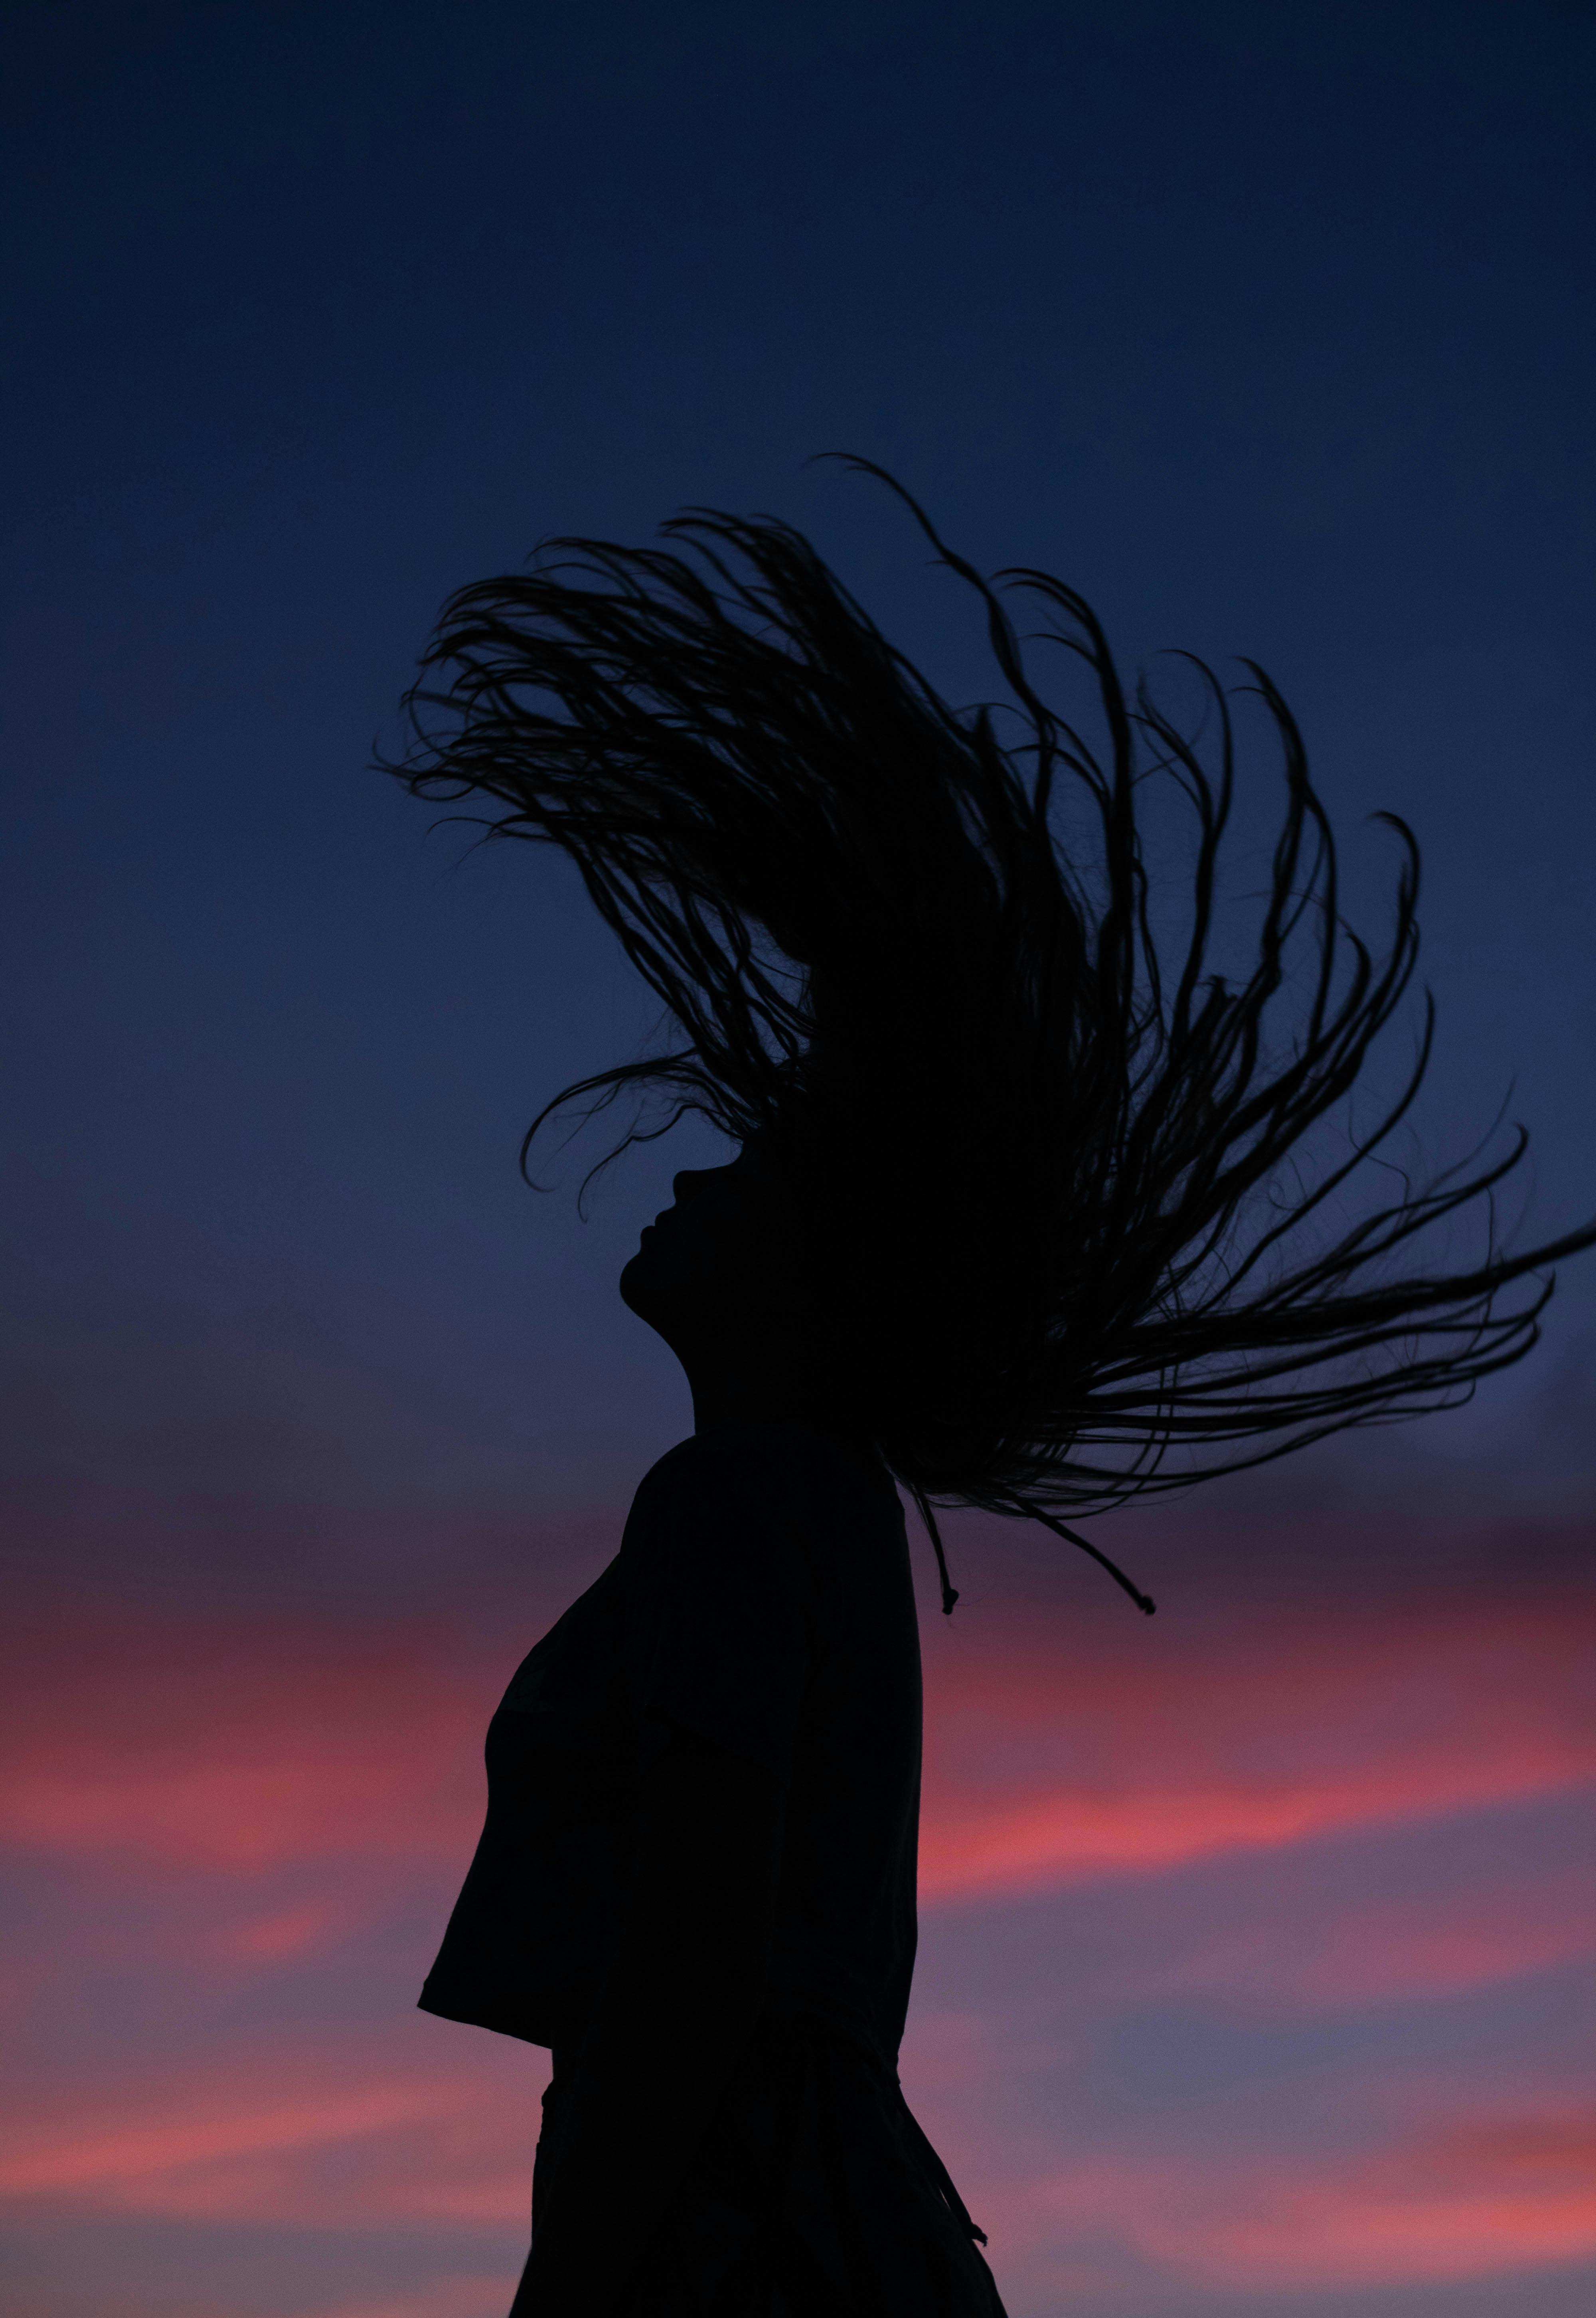 Woman silhouette shaking head with flying hair against purple sky ...